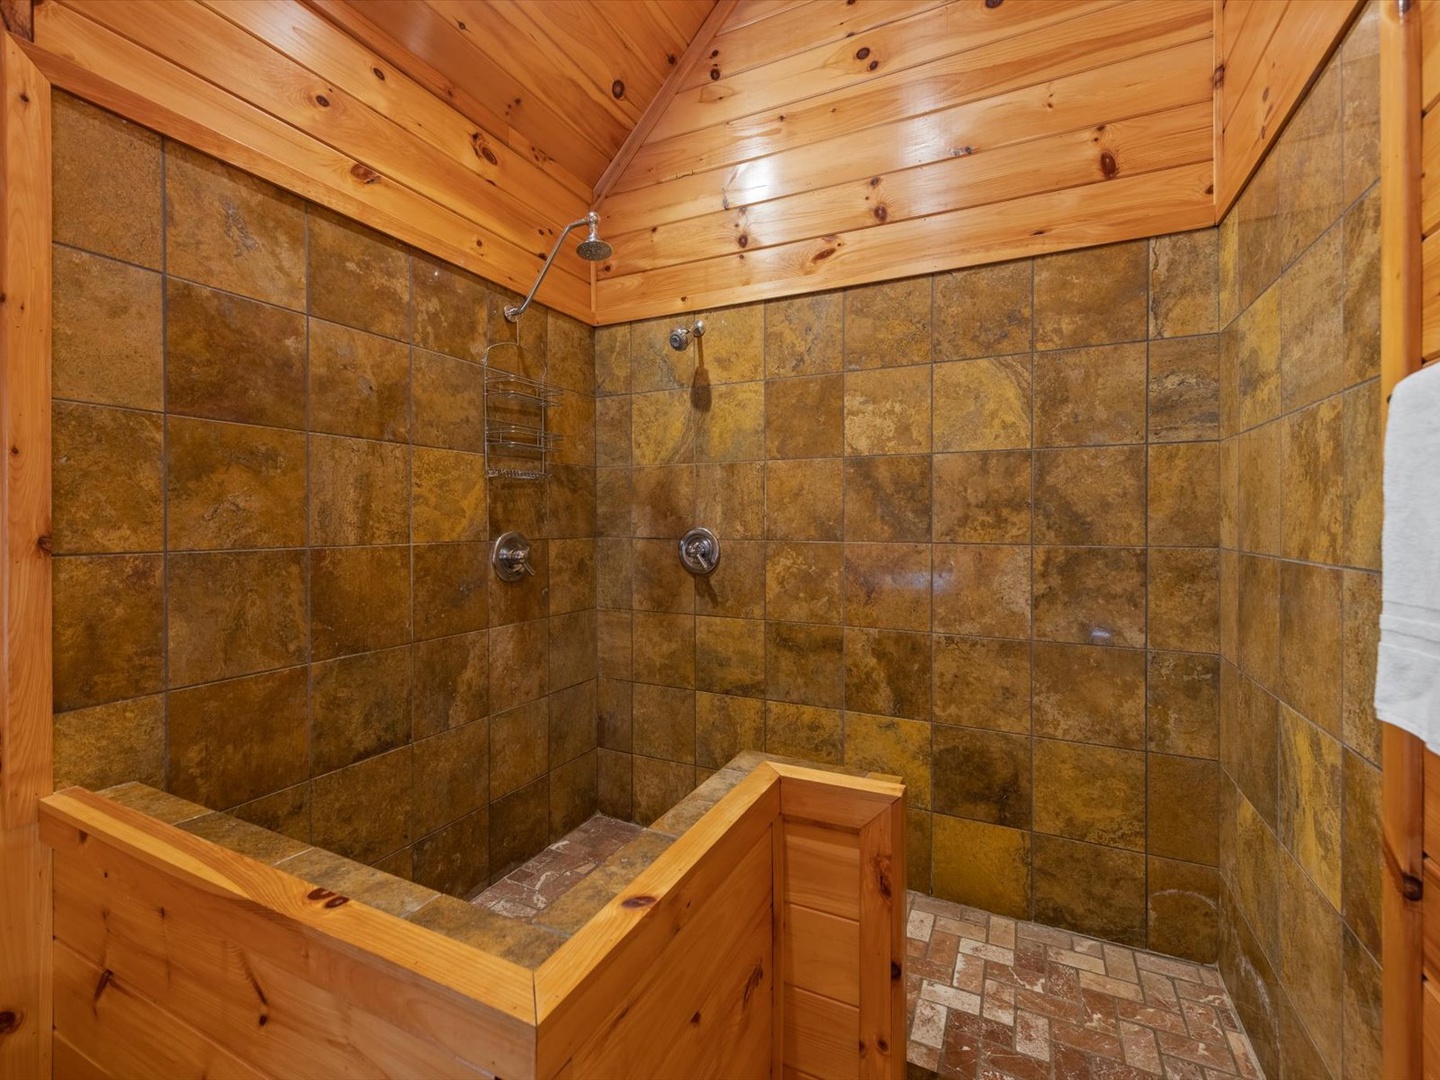 Medley Sunset Cove - Entry Level Primary King Bedroom's Private Bathroom Shower